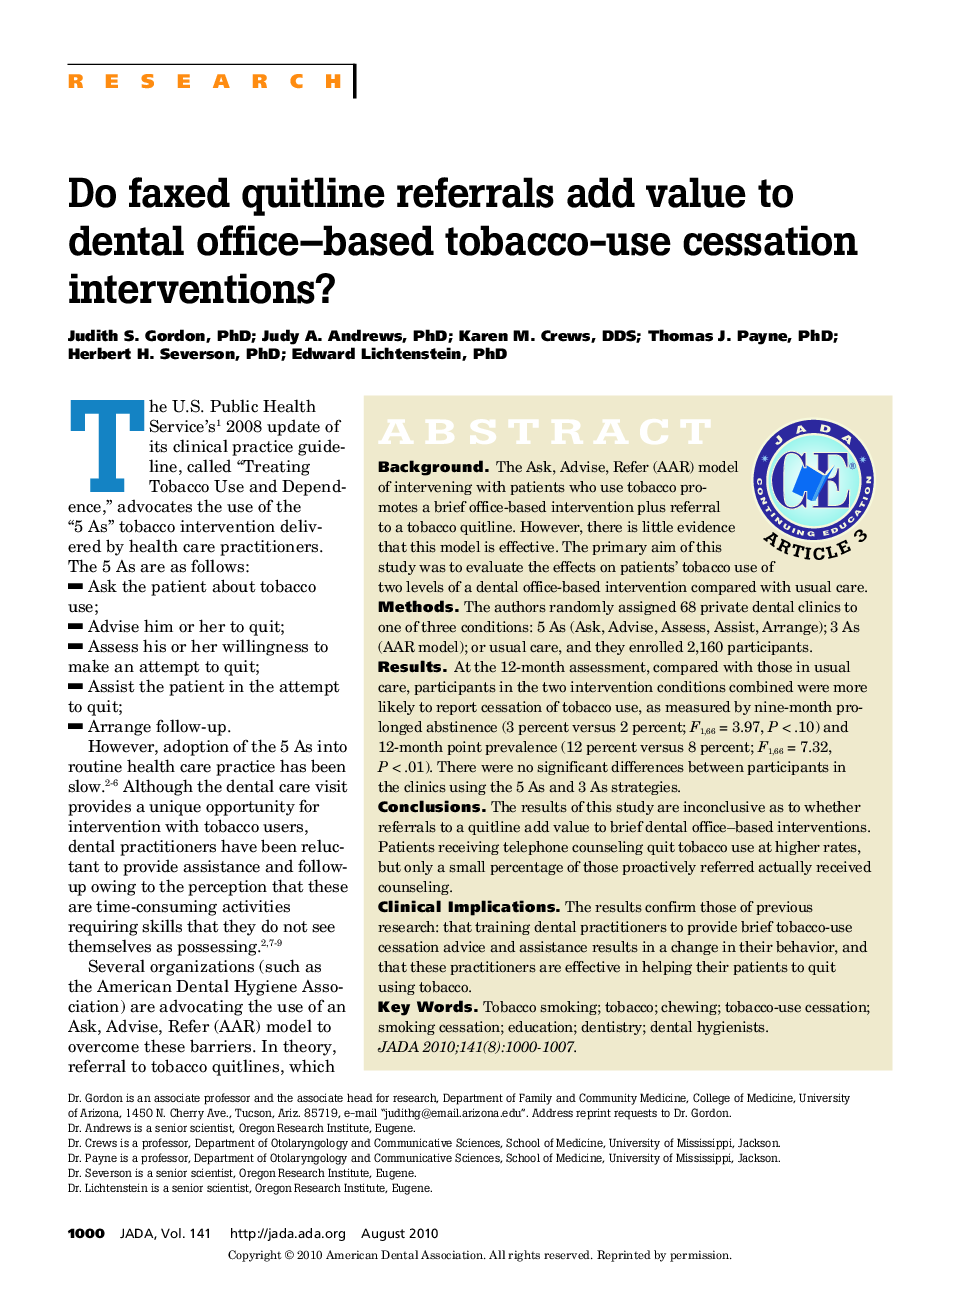 Do Faxed Quitline Referrals Add Value to Dental Office–Based Tobacco-Use Cessation Interventions? 